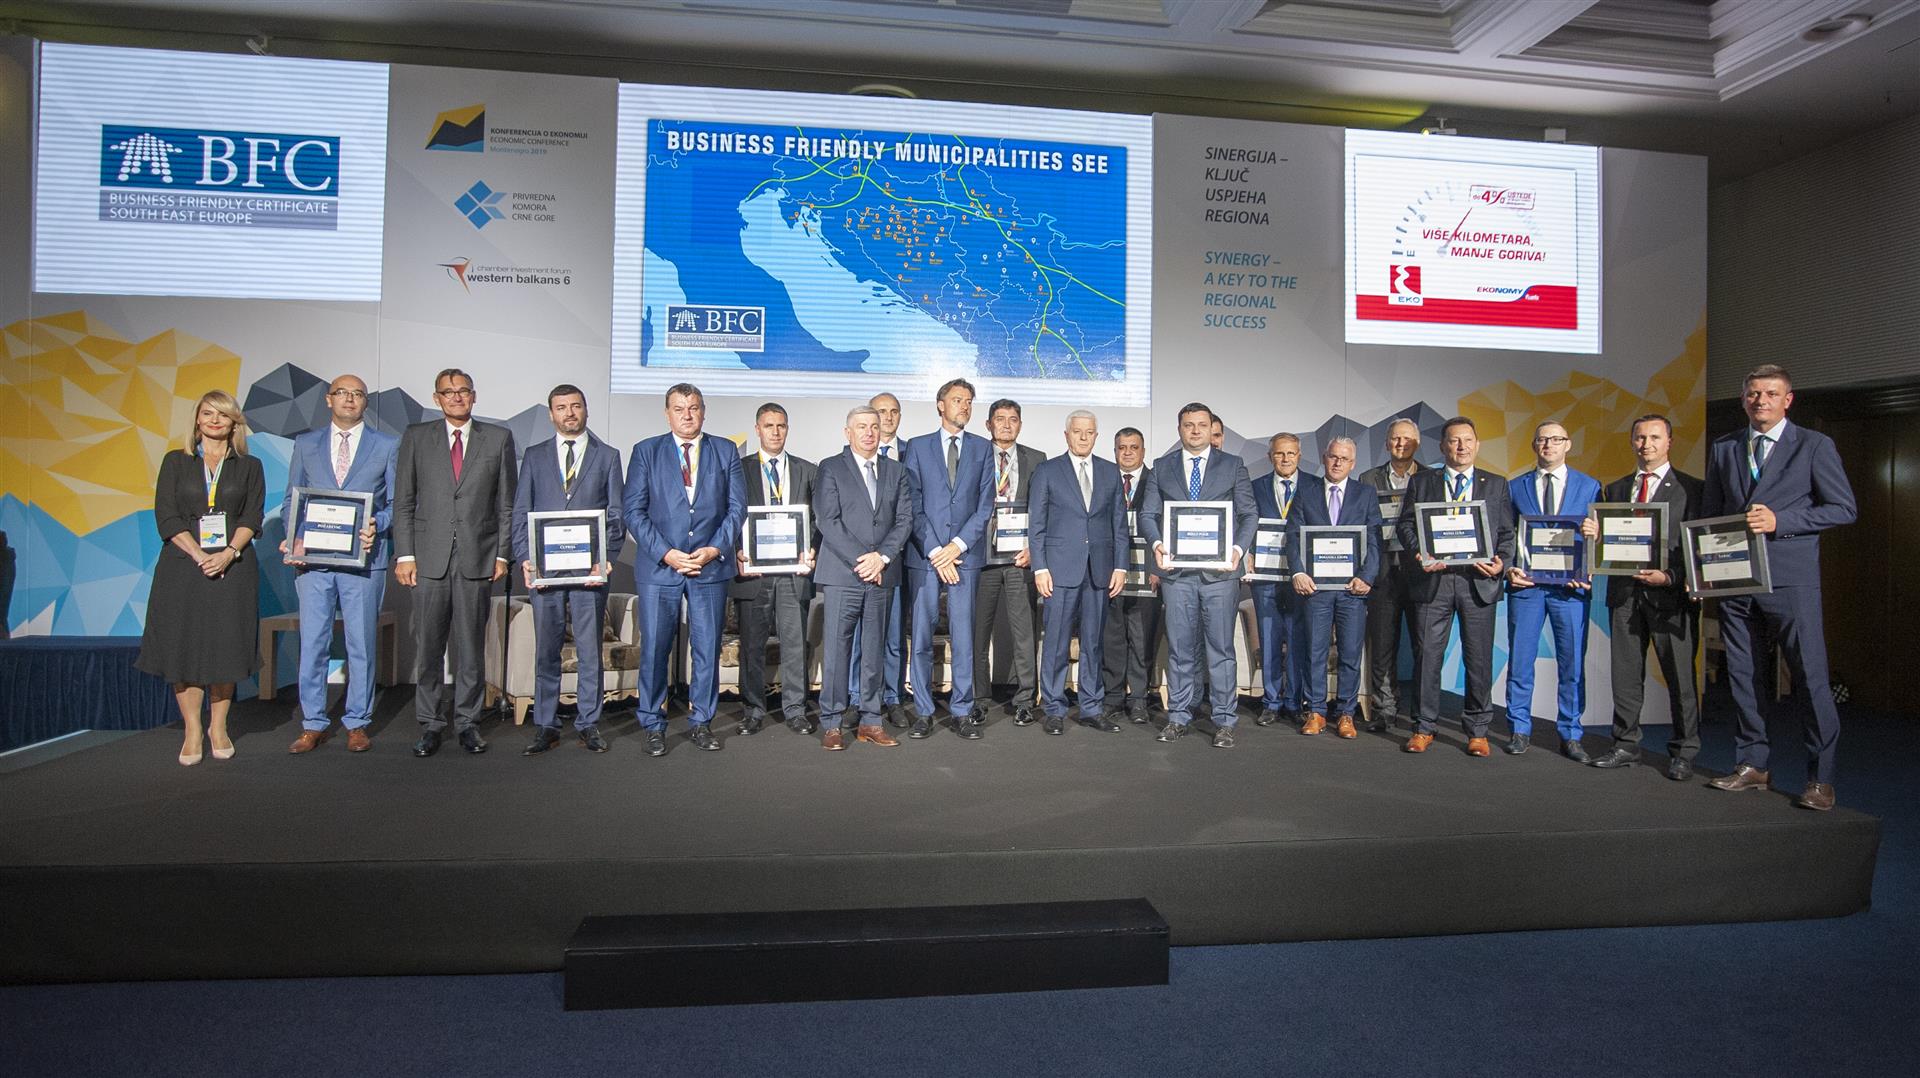 BFC SEE Certificate award ceremony 2019 in Montenegro